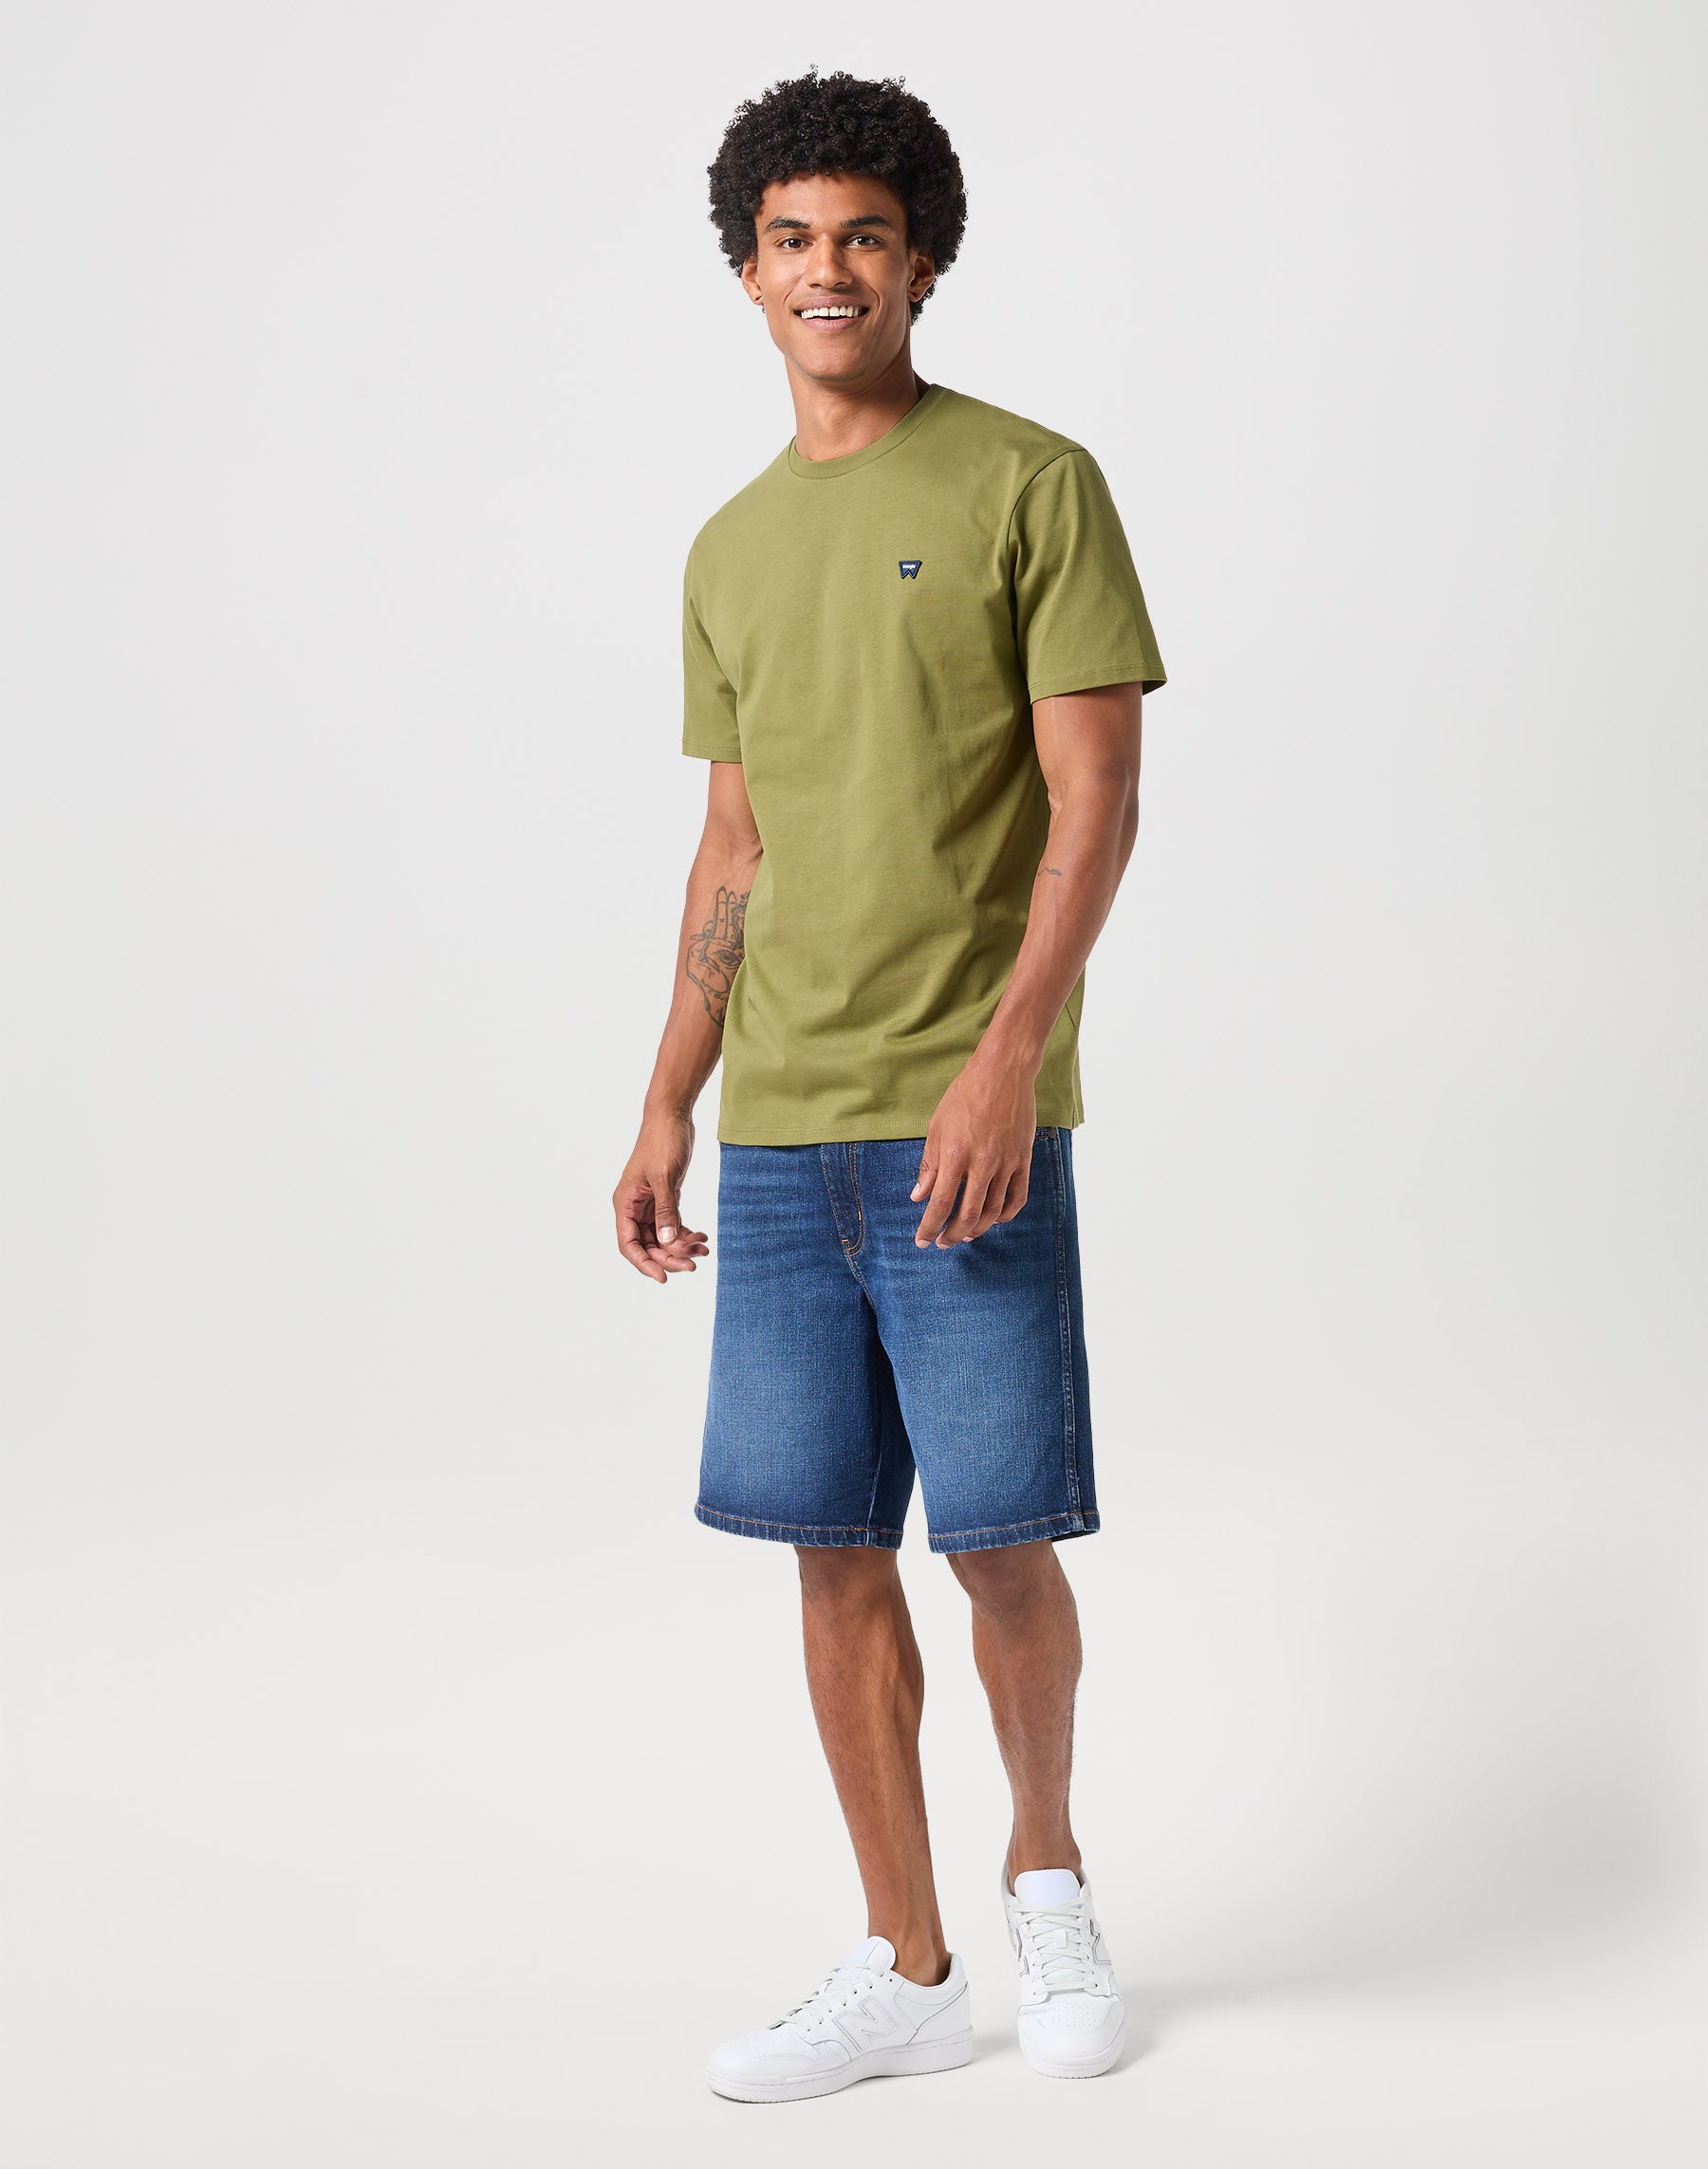 Sign Off Tee in Dusty Olive T-Shirts Wrangler   